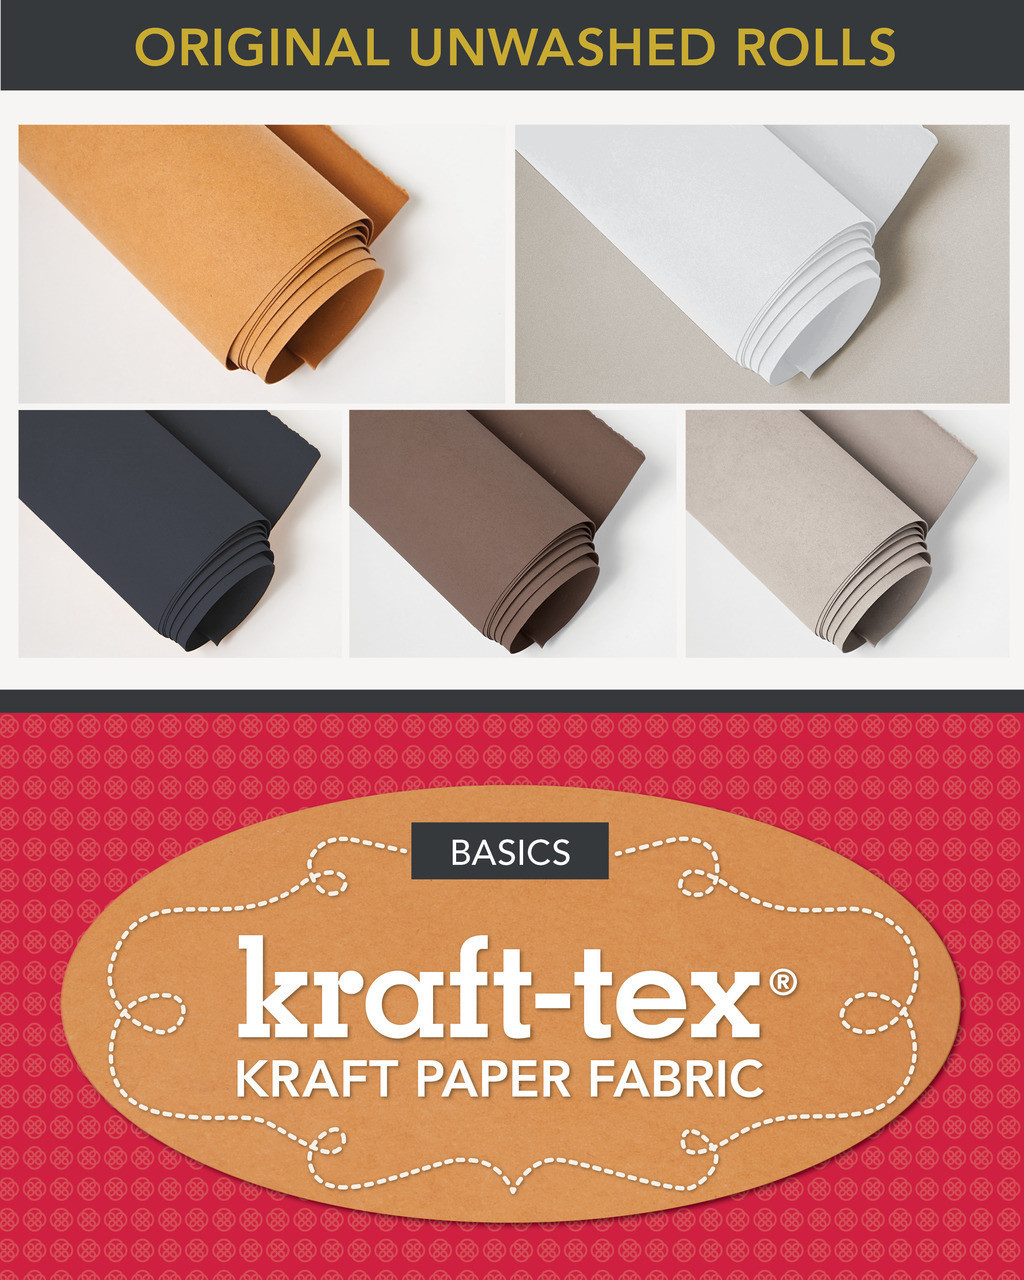 Buy Fabric Photo Transfer Paper Kit Online in India 